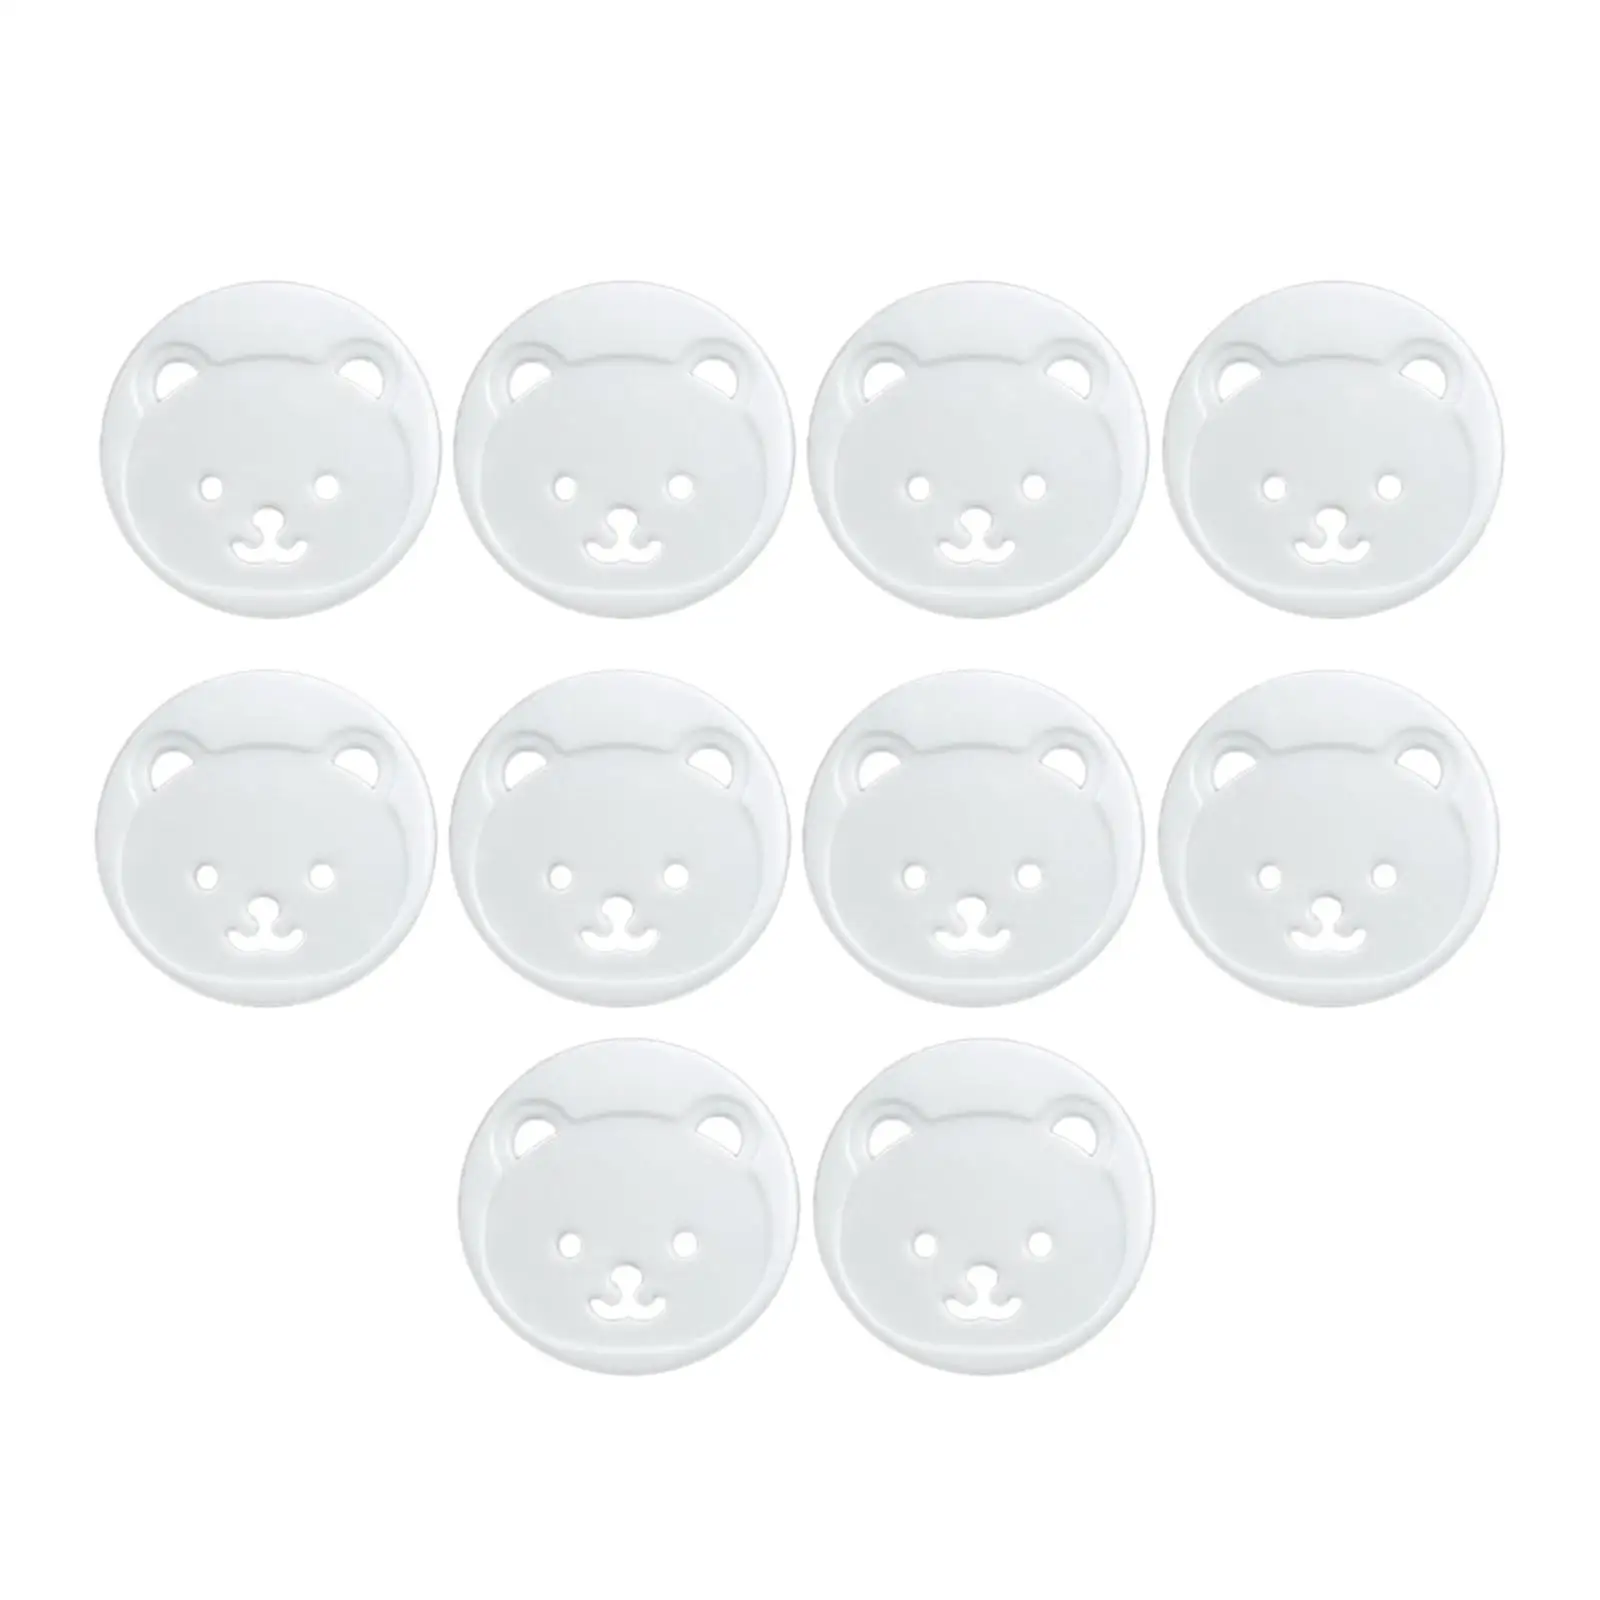 10 Pieces Outlet Covers Baby Proofing Easy to Install Wall Socket Protector for Safety Office Home Childen Toddlers